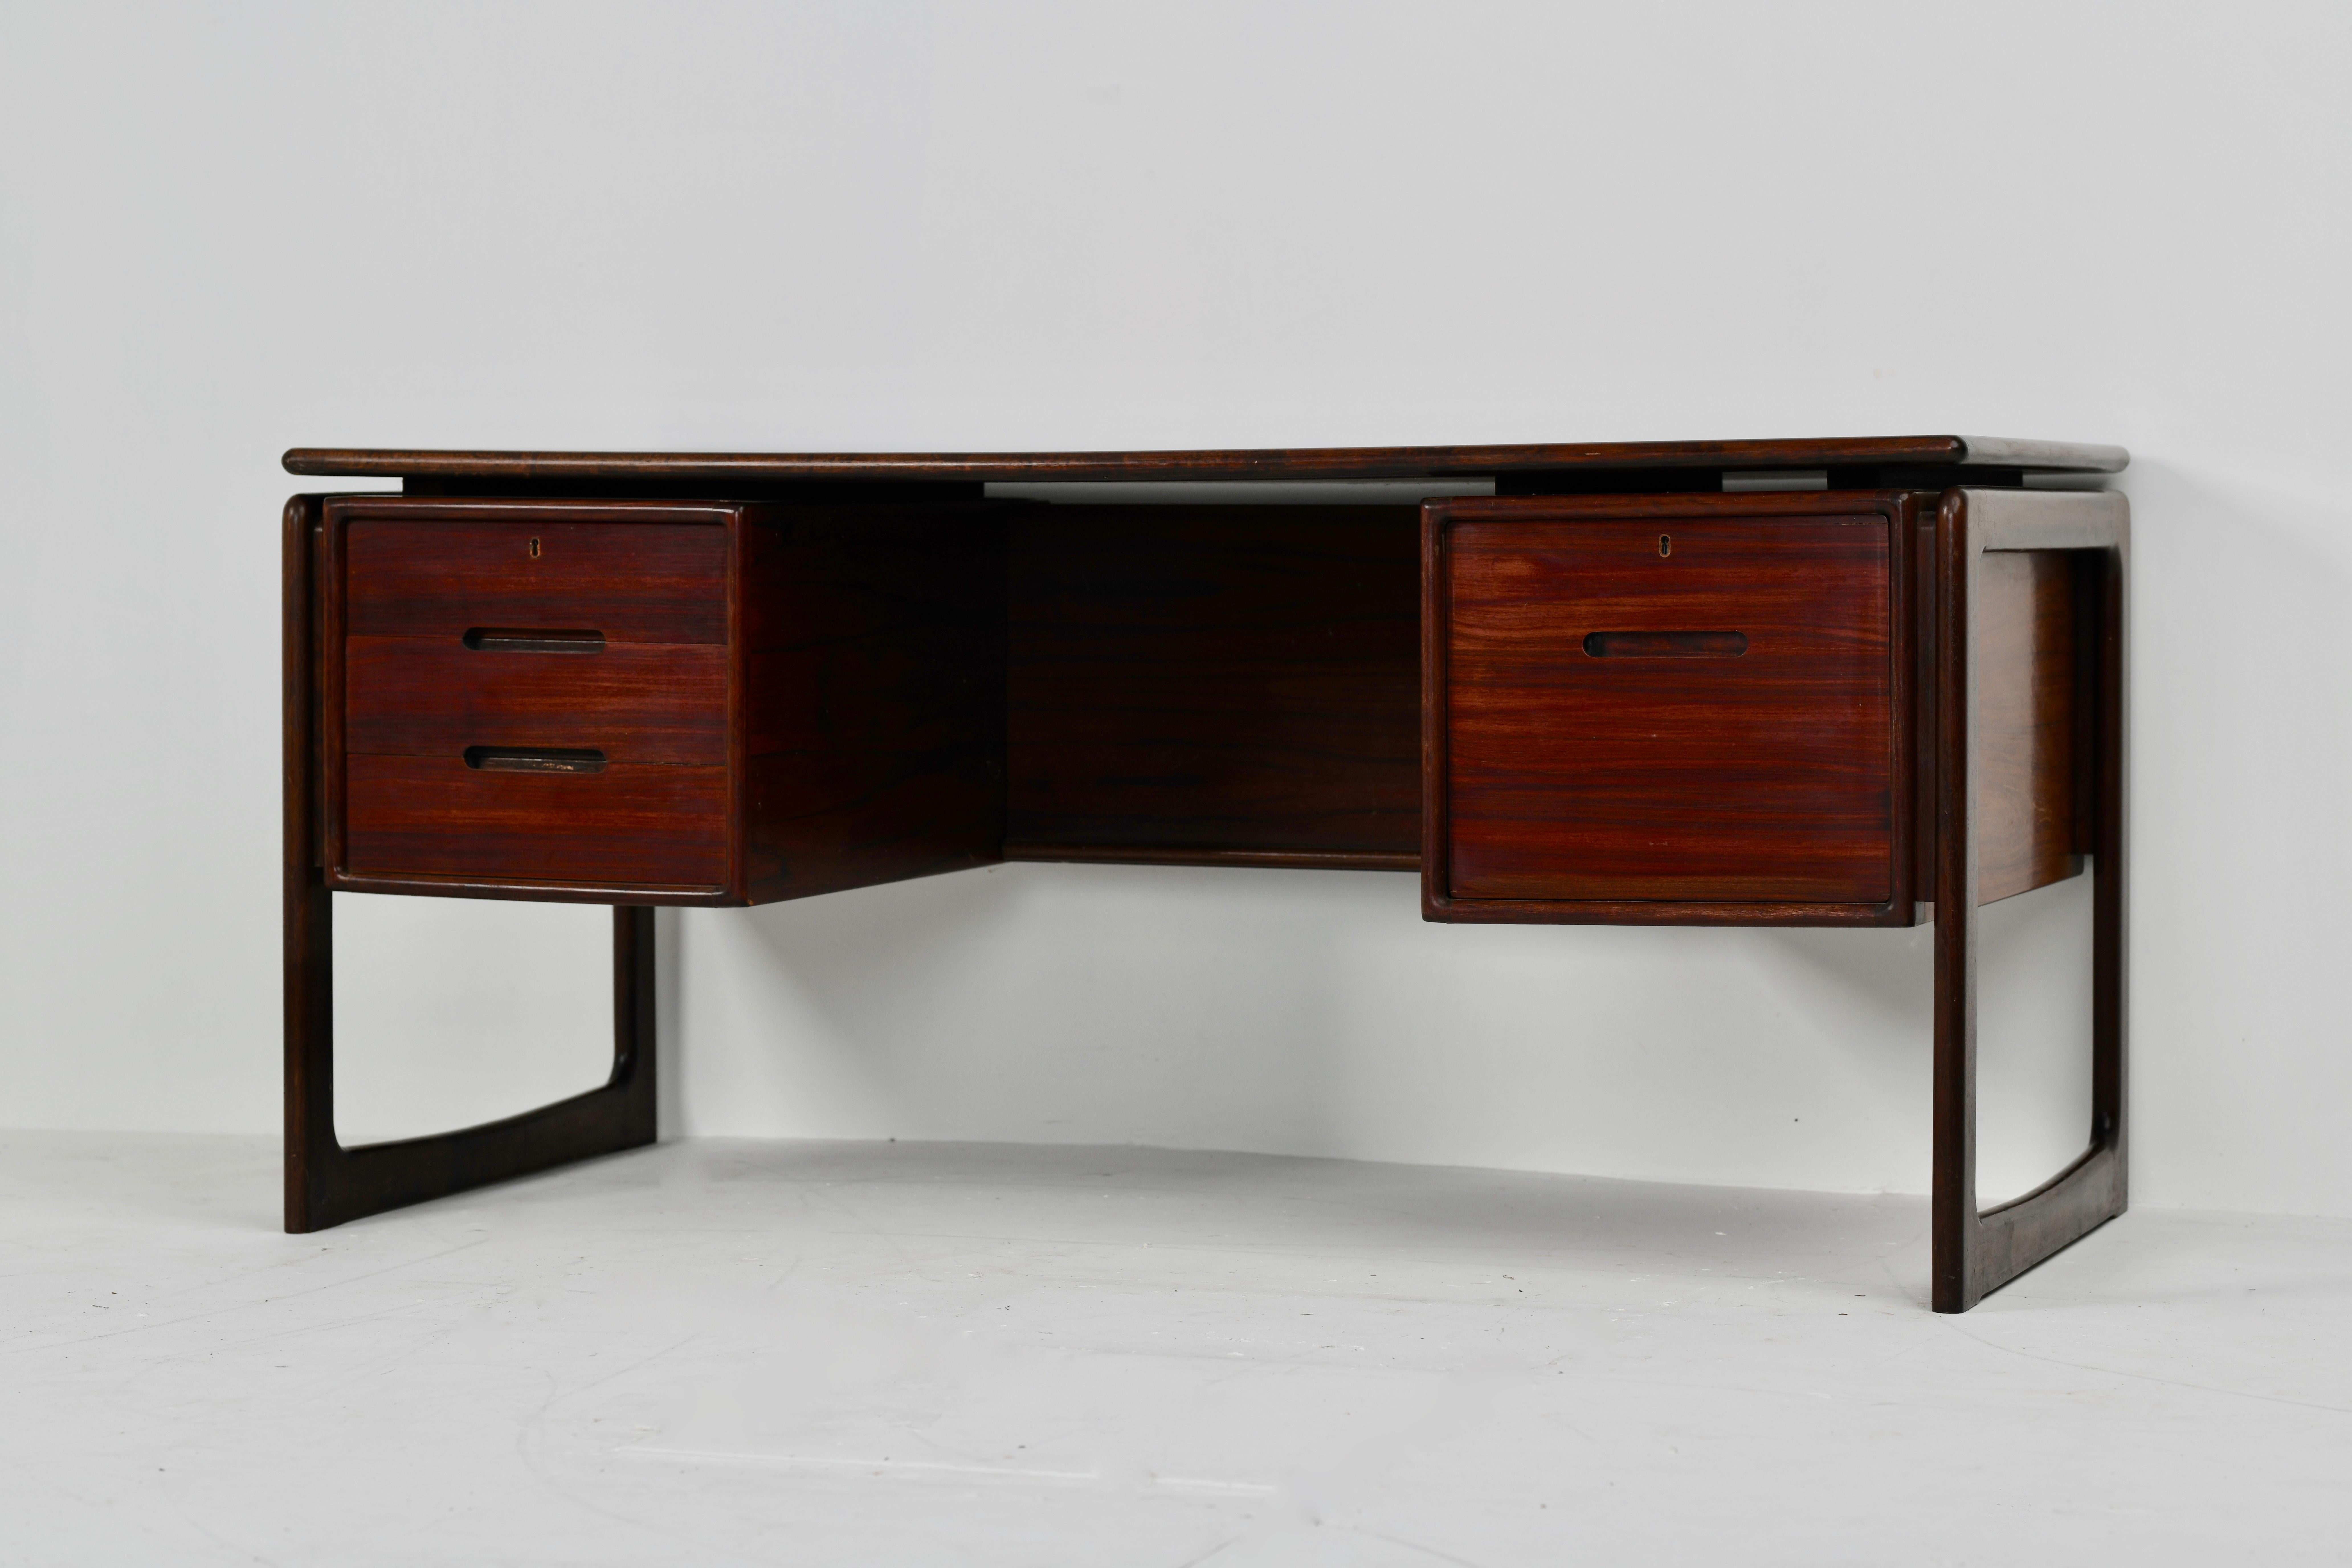 Stylish modern executive desk designed and manufactured in Denmark by Drylund circa 1960s. This striking Danish Modern design features a rosewood frame and three spacious drawers on the left side, a file cabinet on the right, and an open back with